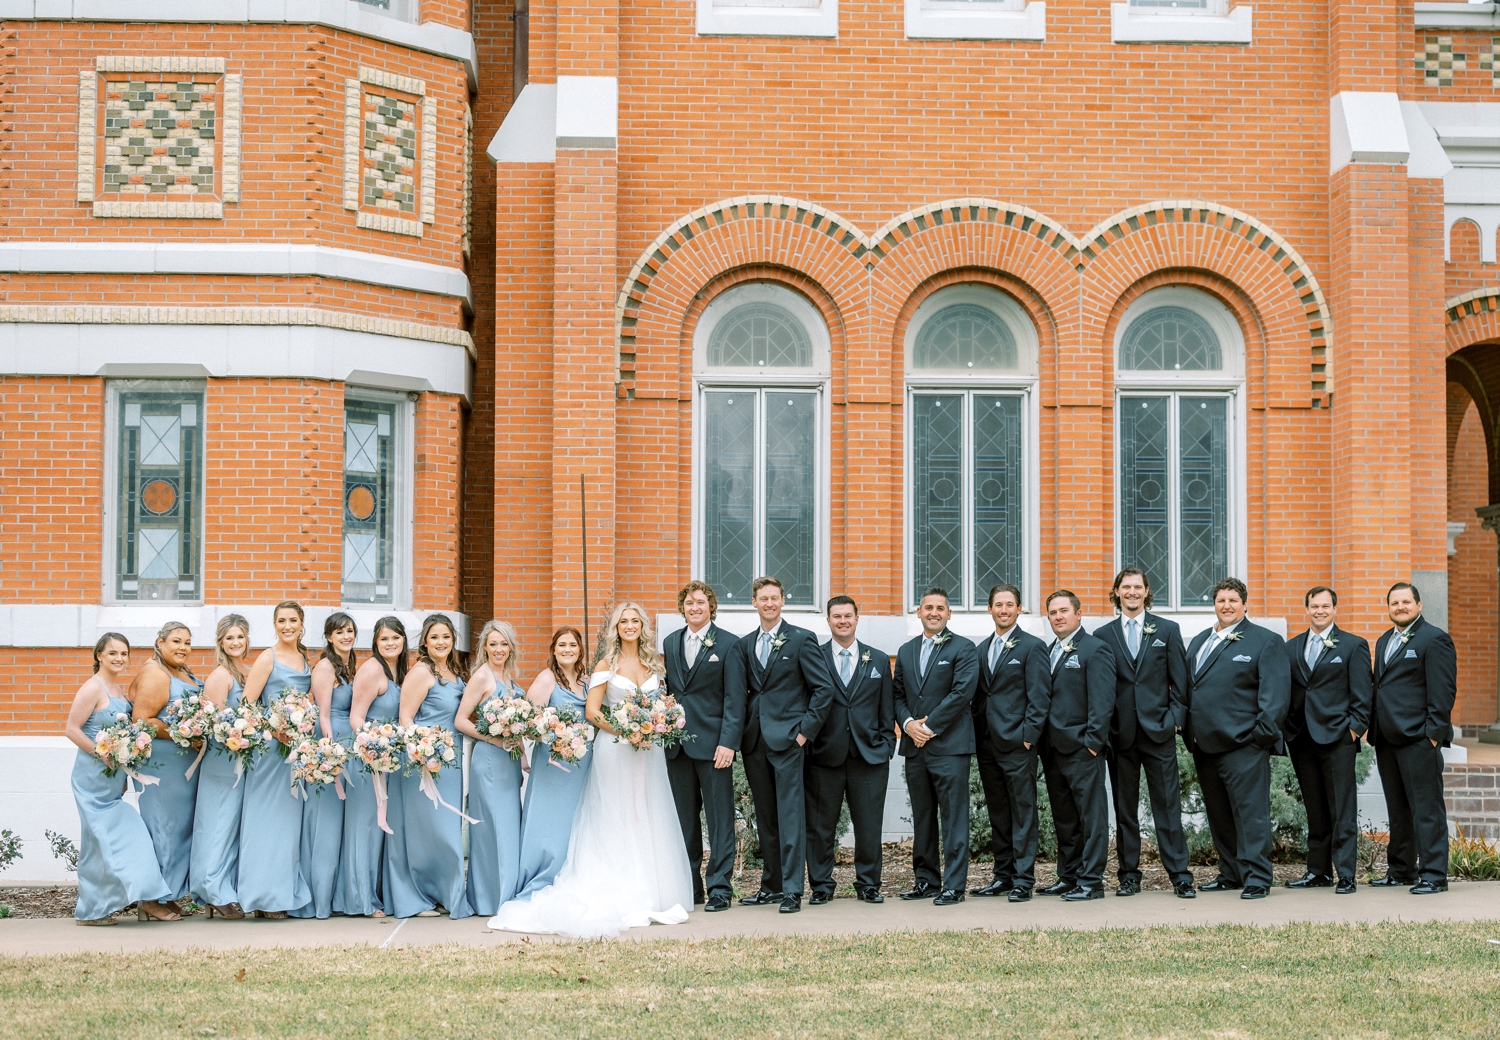 Wedding Party Portraits Outside of Church | Reiley and Rose | Central Texas Floral Designer | Luling, TX Wedding | Western Wedding, pastel wedding, Cinderella wedding inspo, ideas for beauty and the beast wedding, light blue bridesmaid dress, groomsmen suits | via reileyandrose.com